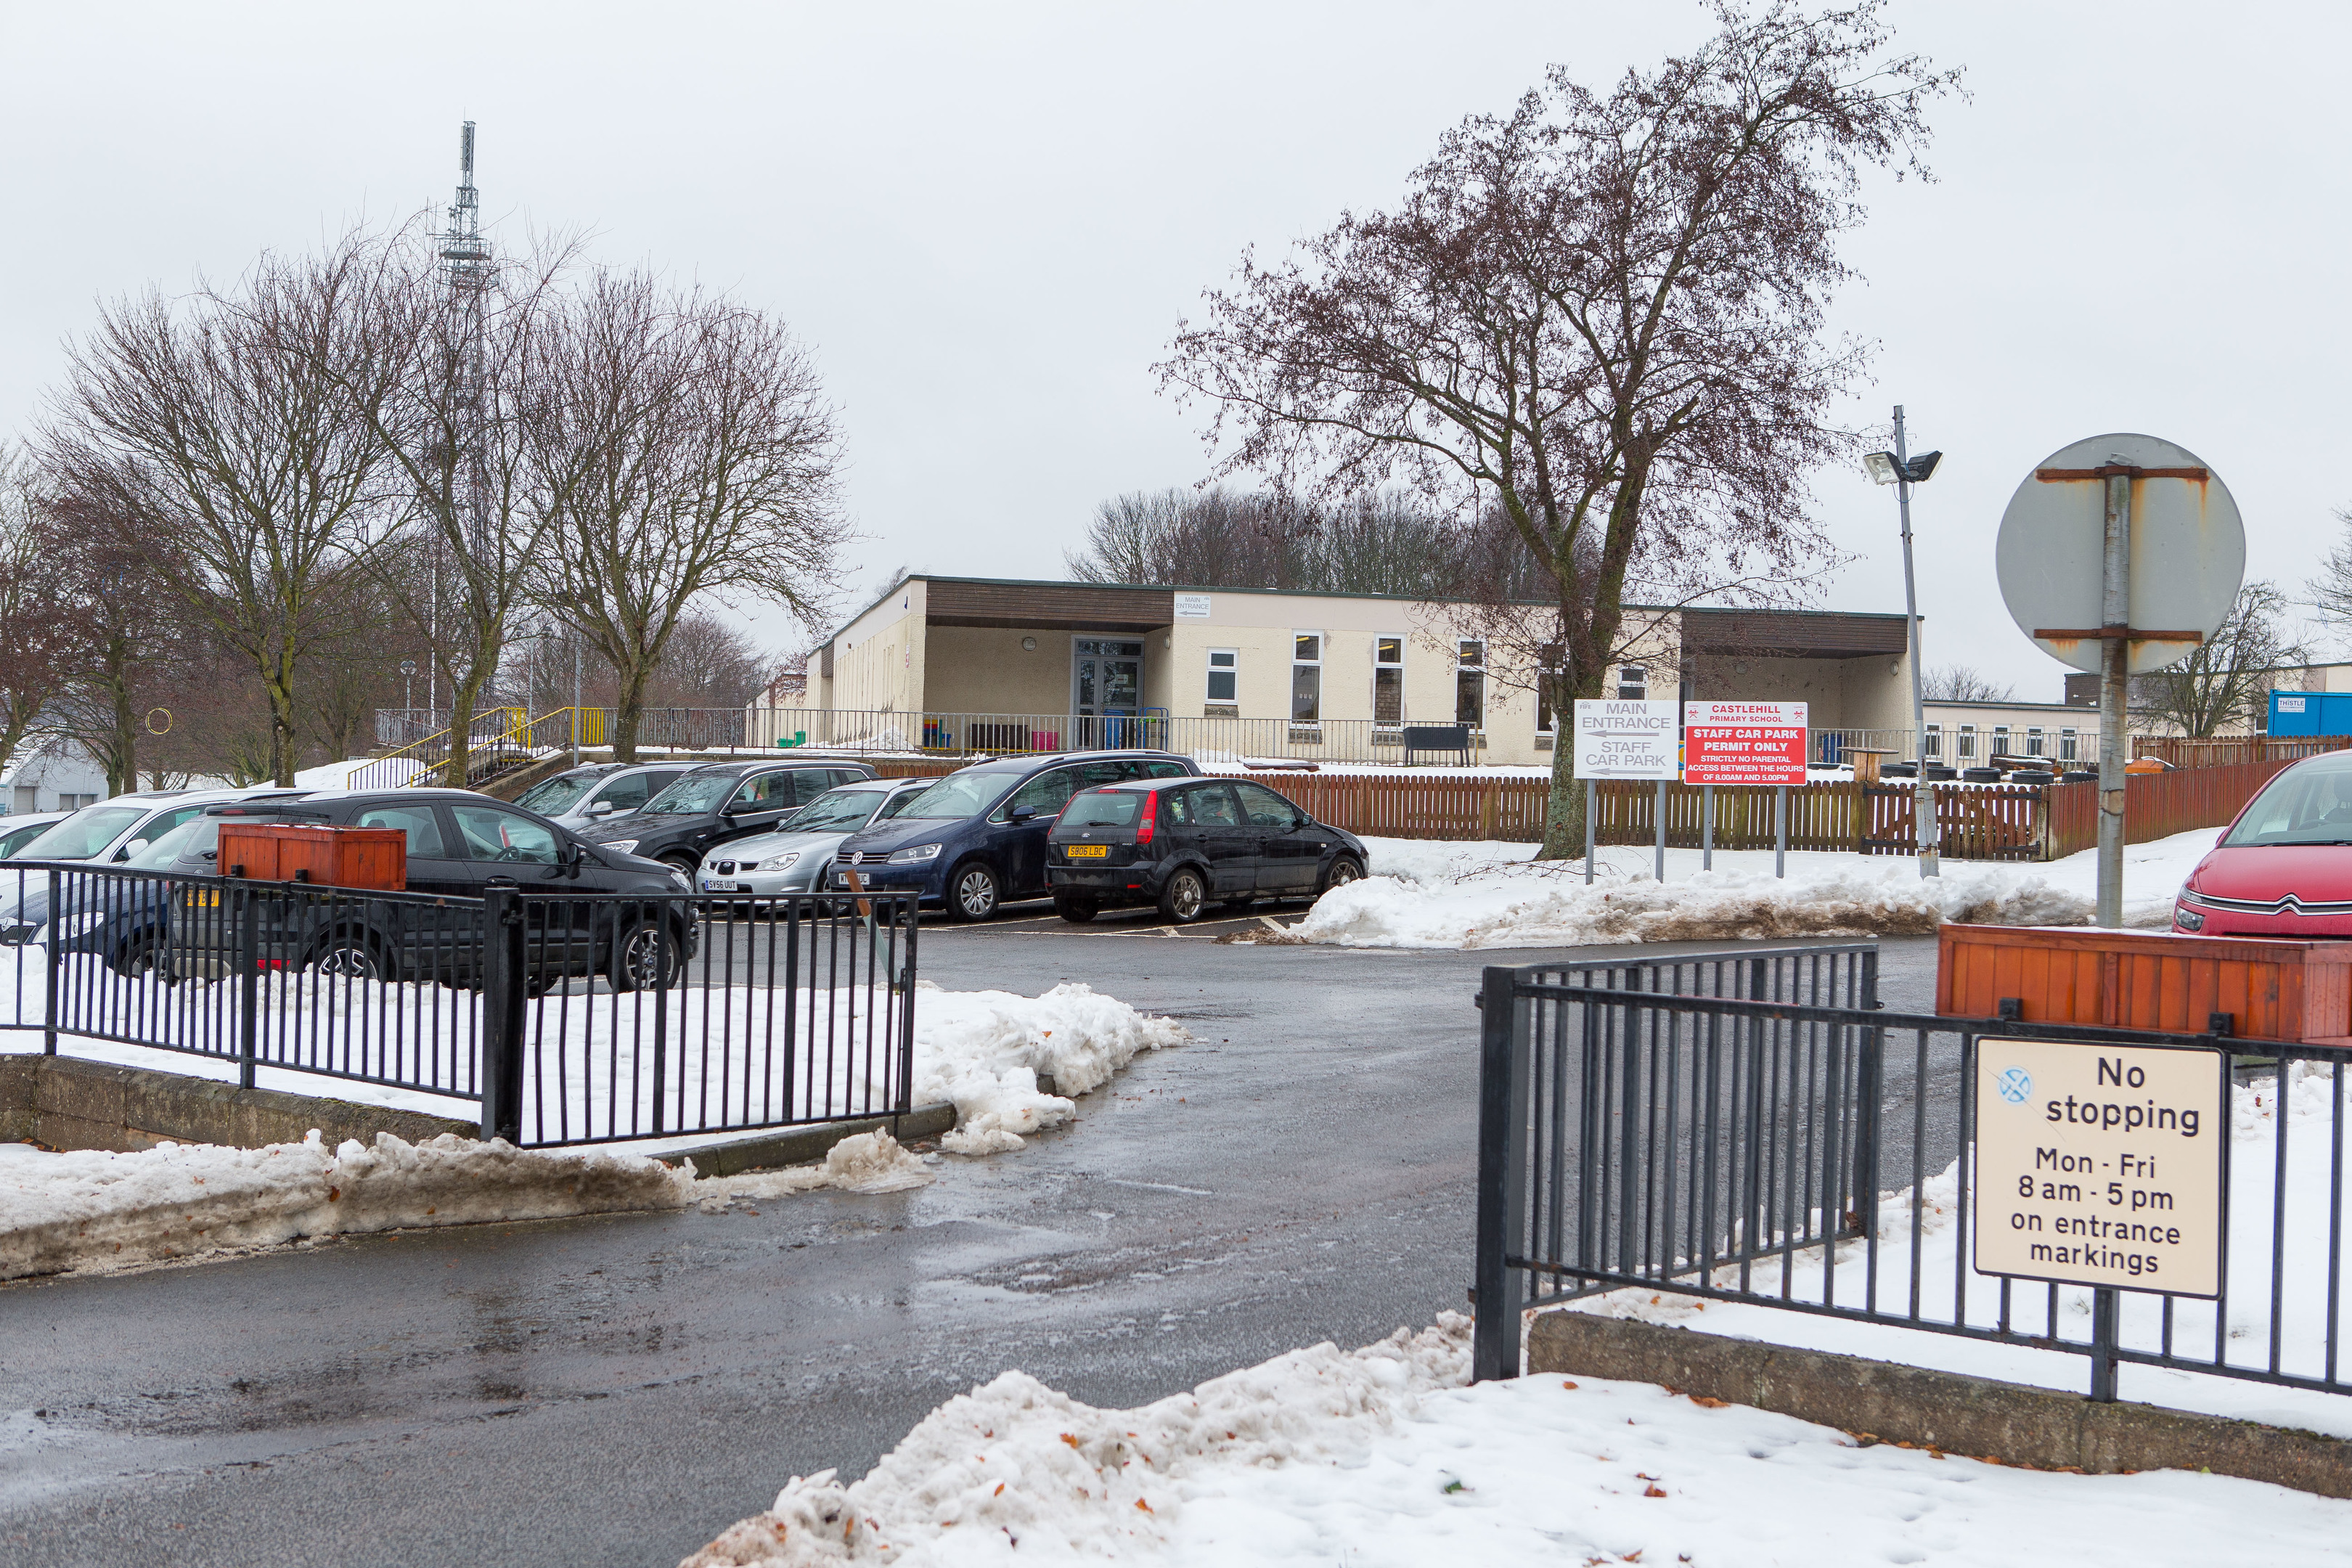 The staff car park at Castlehill Primary School in Cupar was full as they returned to work - but pupils remained off on Monday.